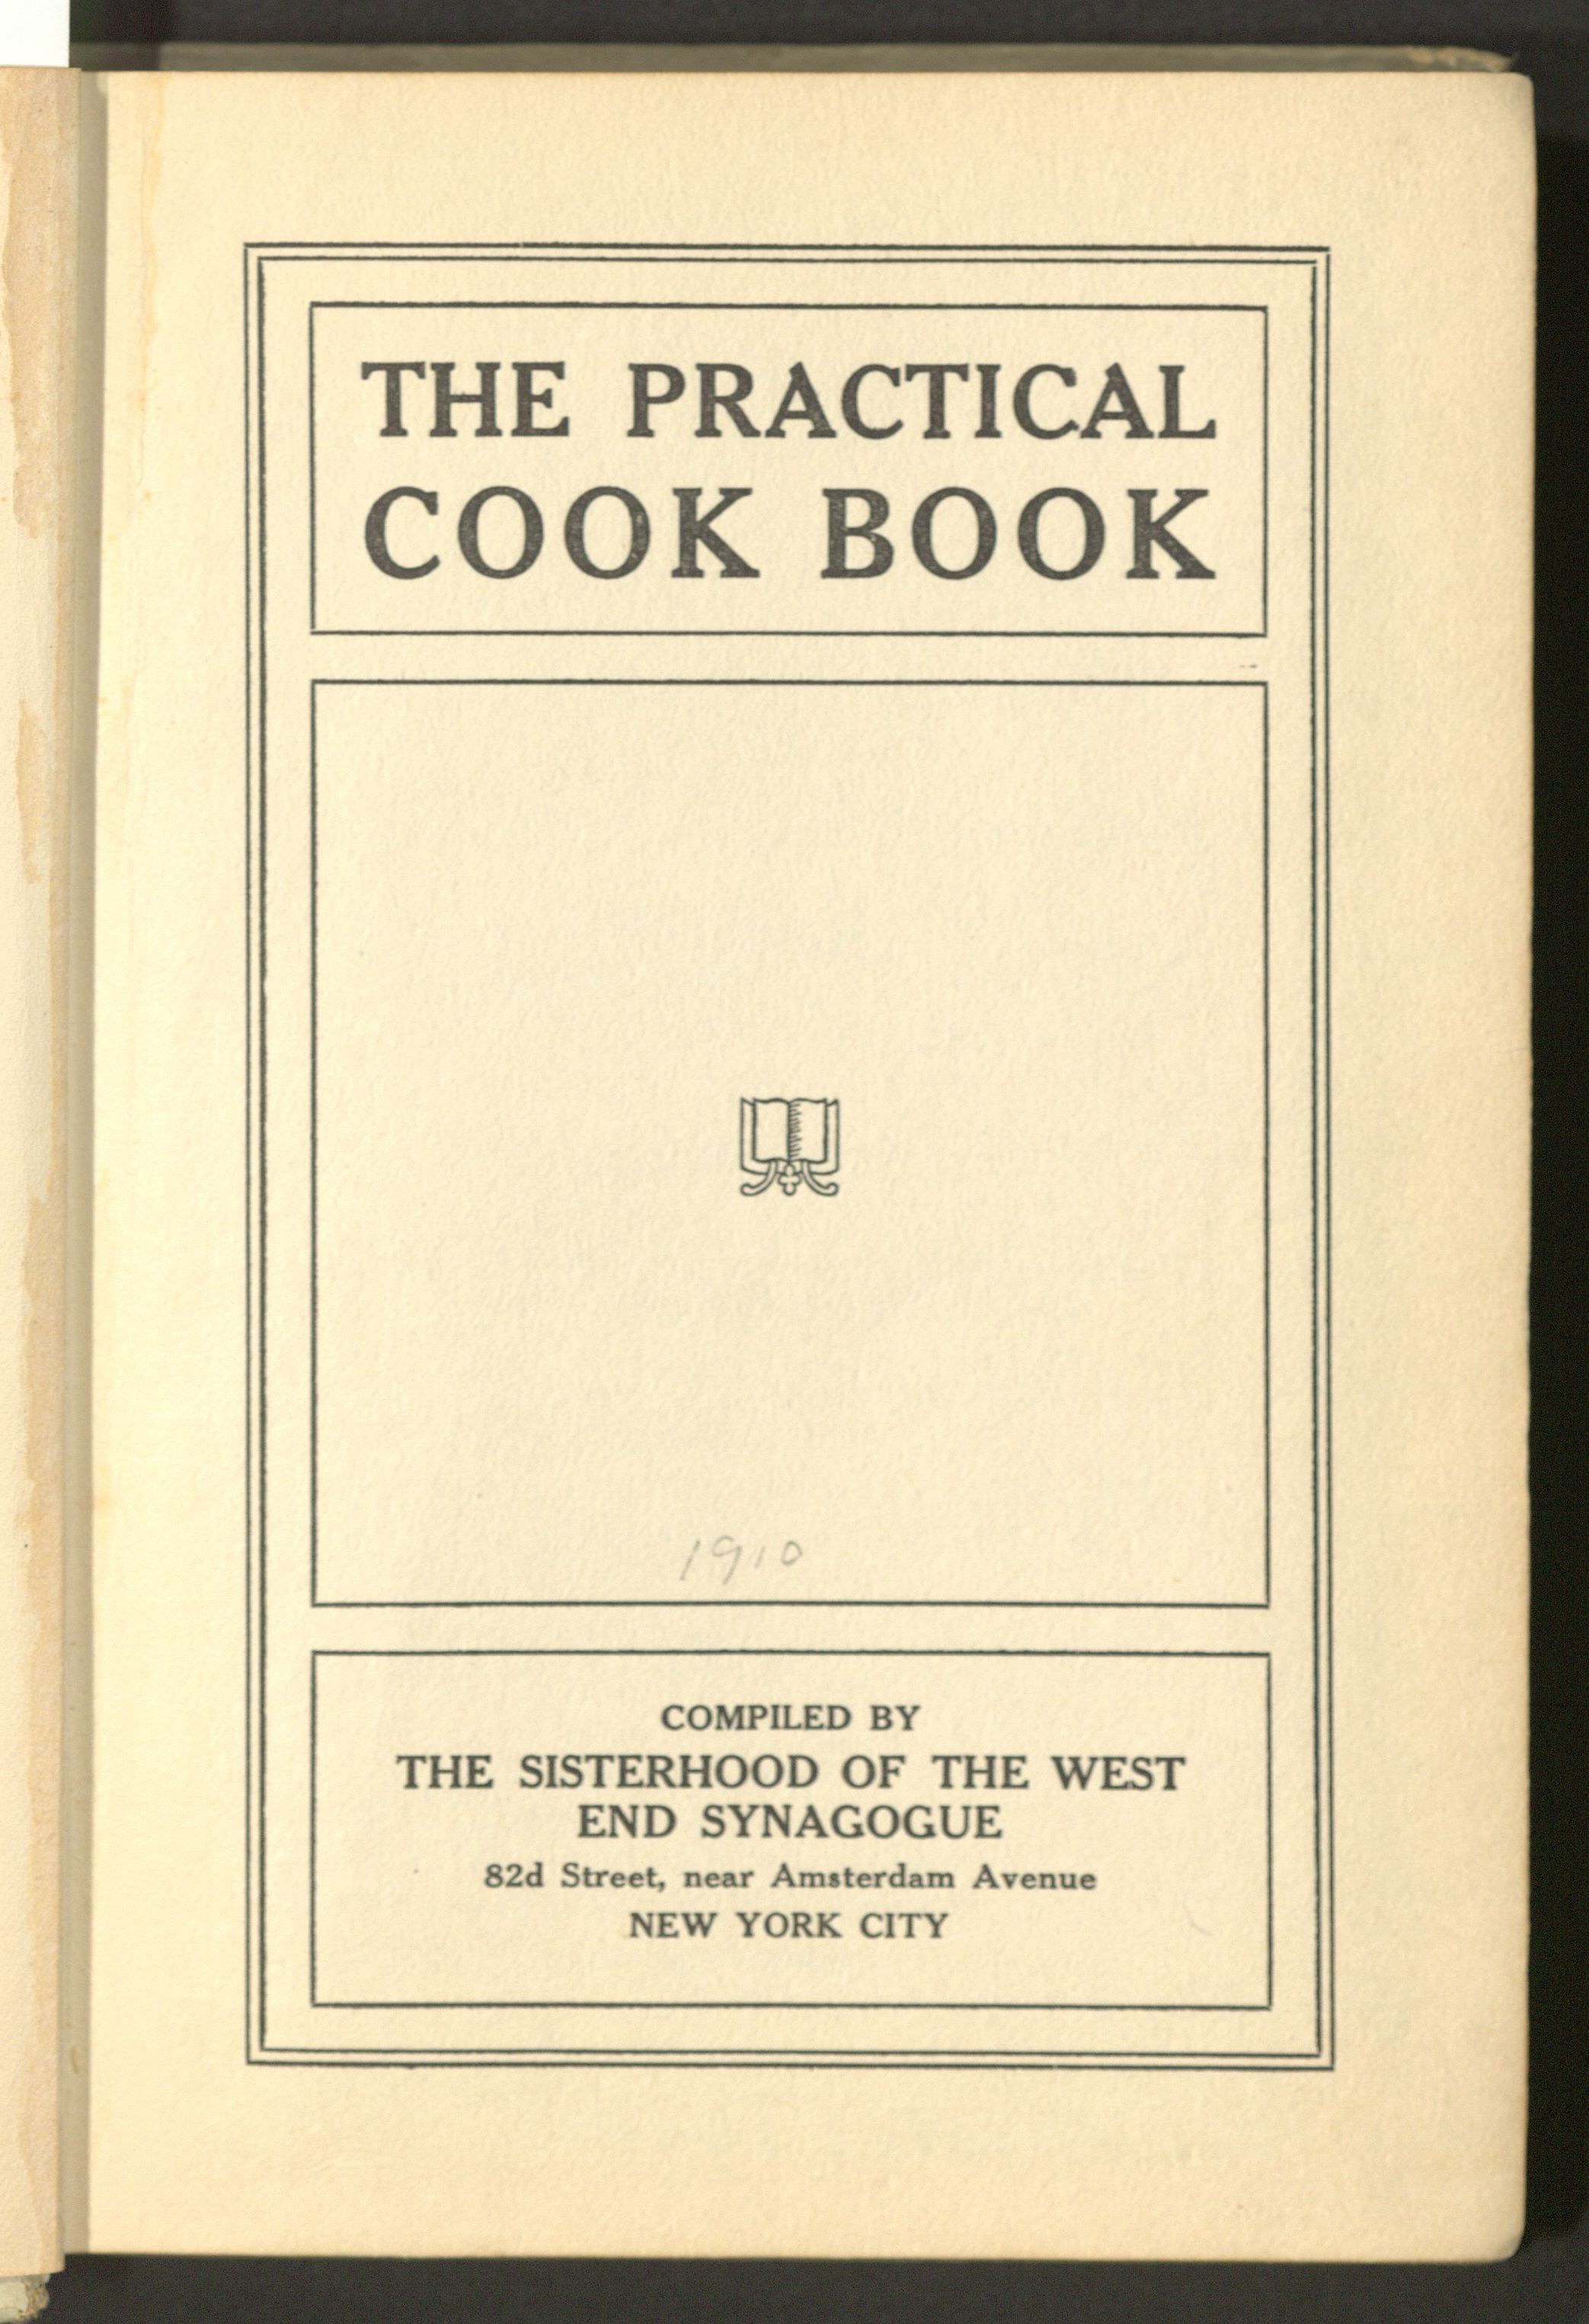 Title page with "THE PRACTICAL COOK BOOK" in capital letters at the top, and publication information at the bottom, both enclosed by line borders